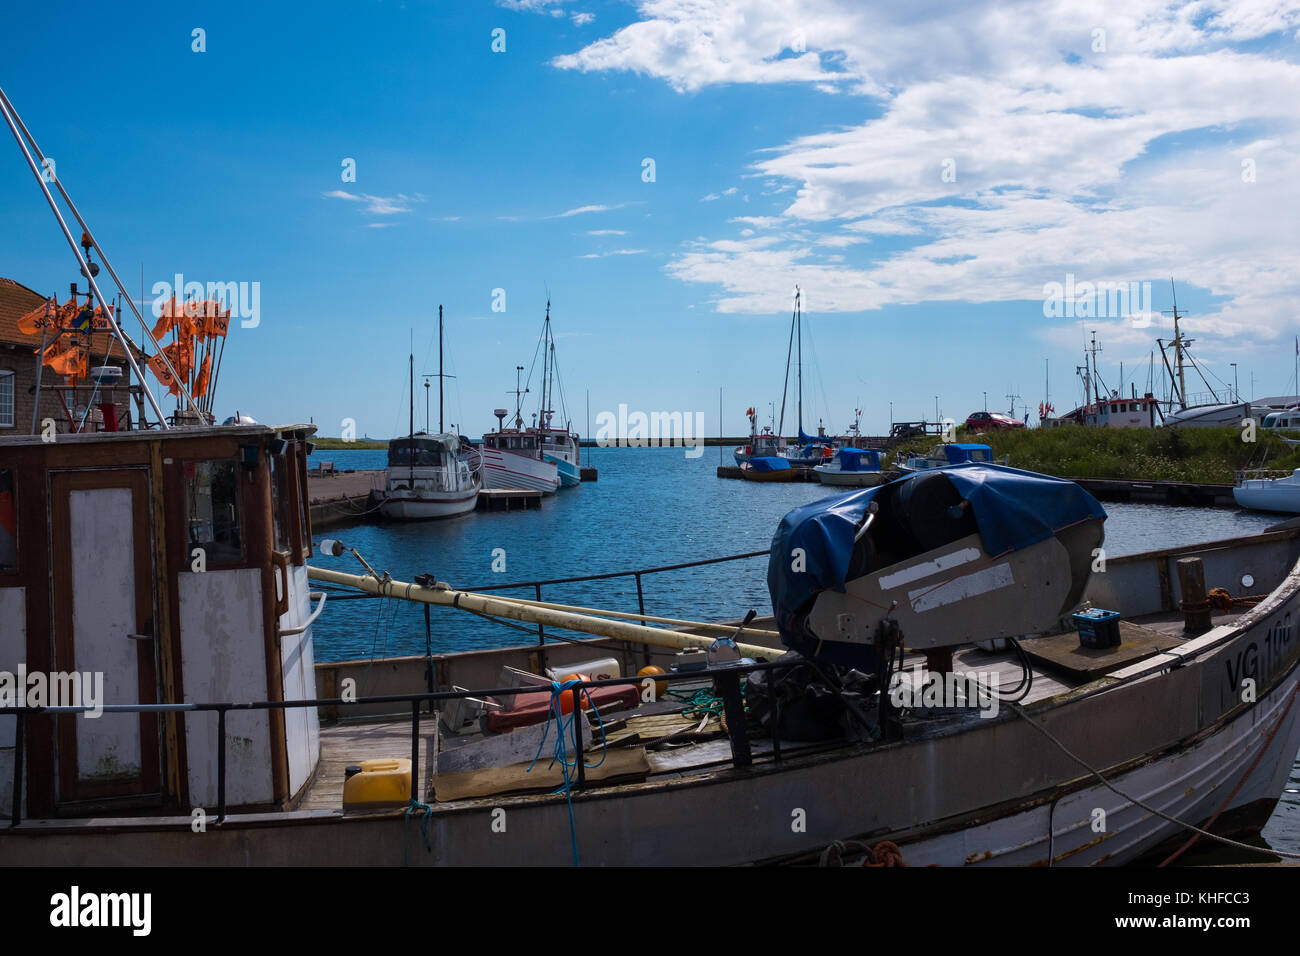 Calm smalltown fishing harbor in southern Sweden Stock Photo